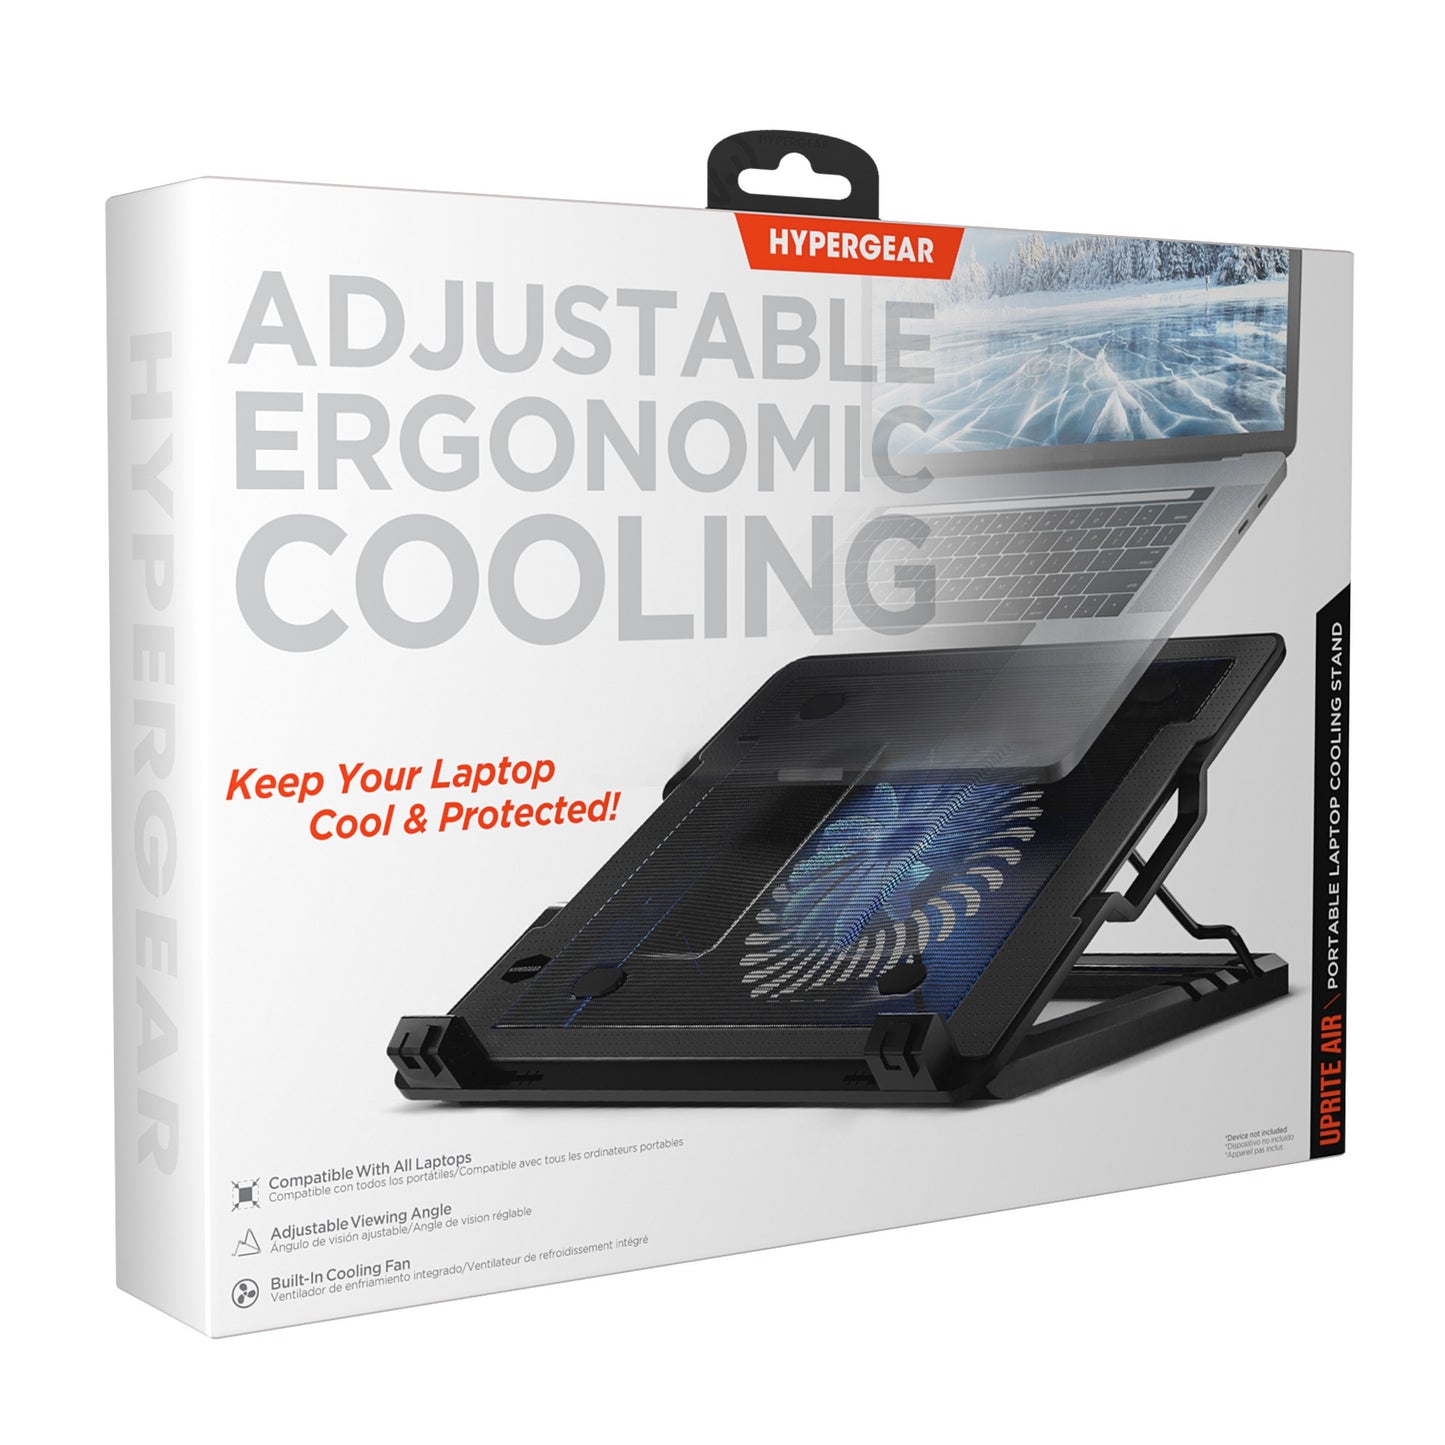 HyperGear UpRite Air Portable Laptop Cooling Stand - Black - 15-10558